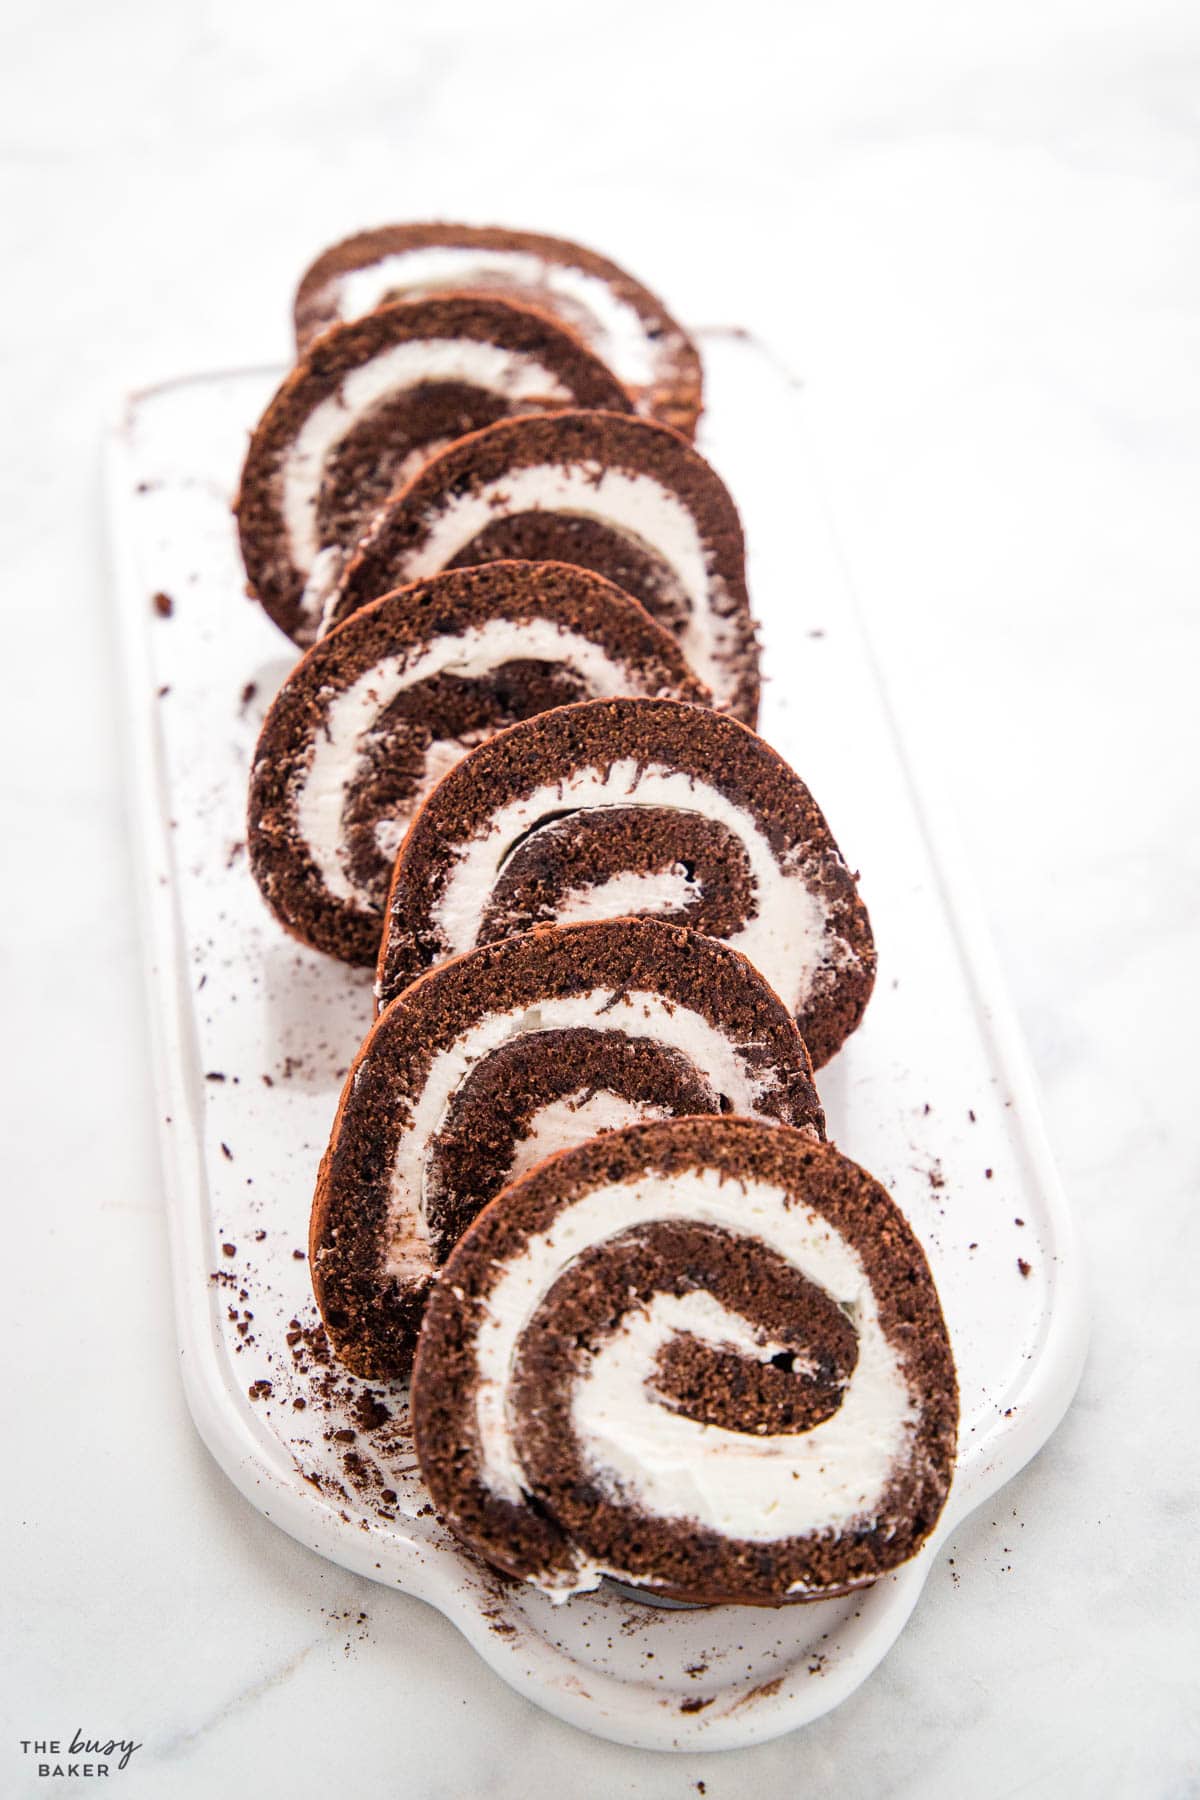 rolled cake recipe with cocoa and whipped cream filling